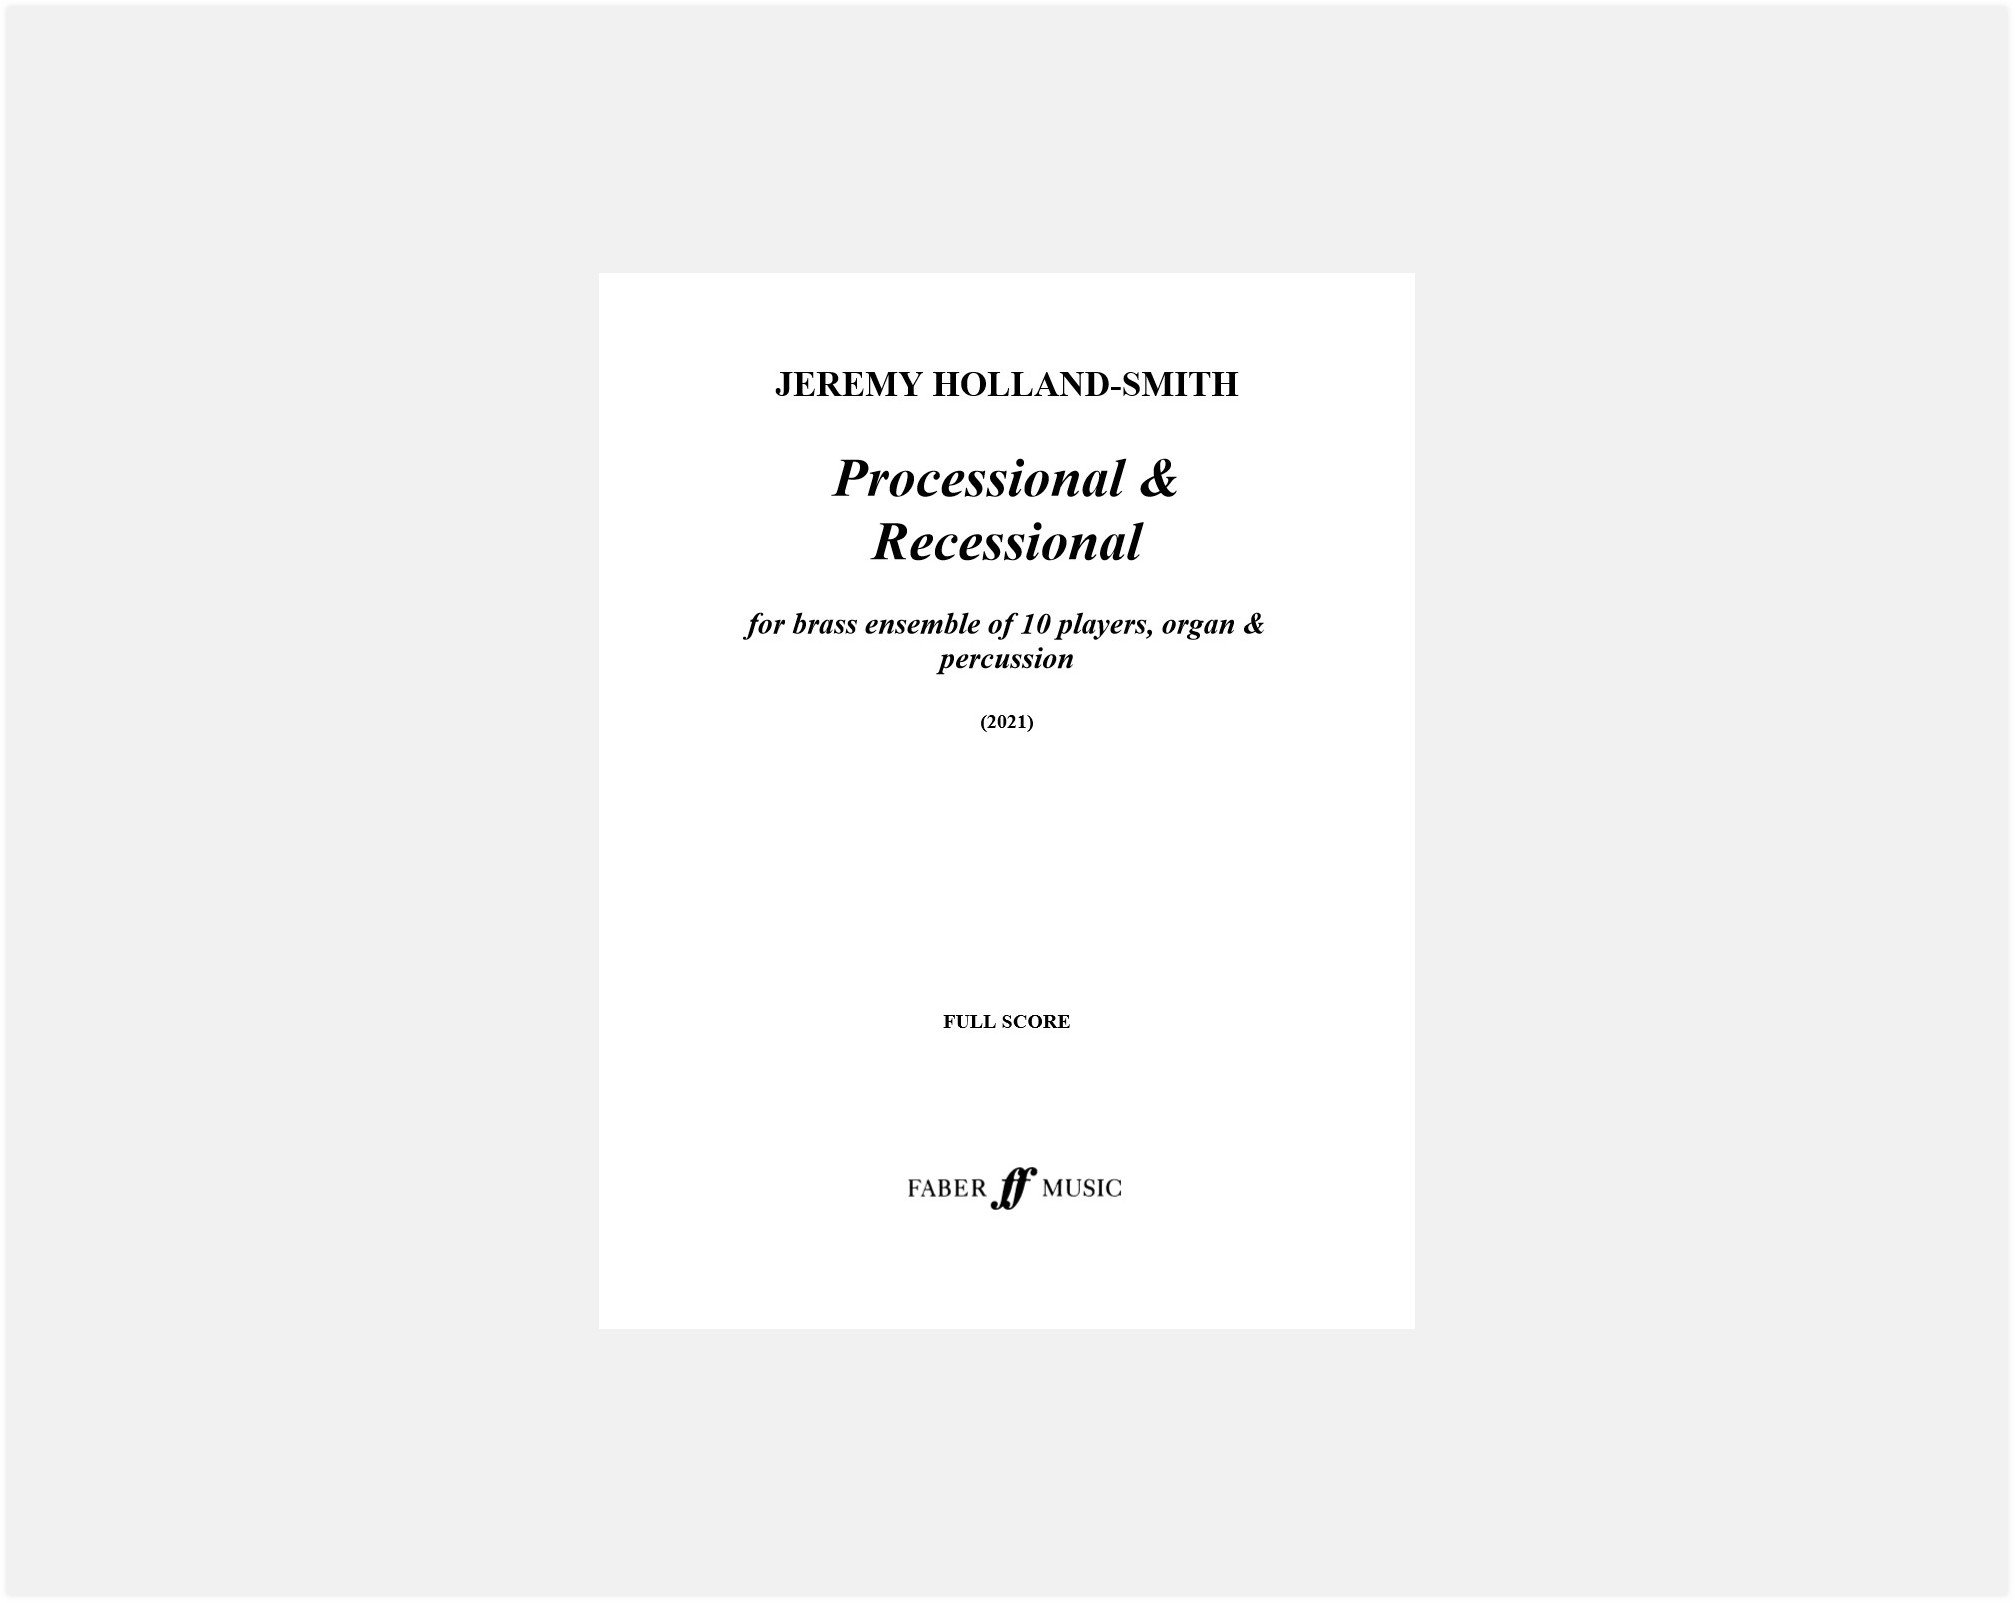 Processional and Recessional (Faber) - Concert Score_1.jpg